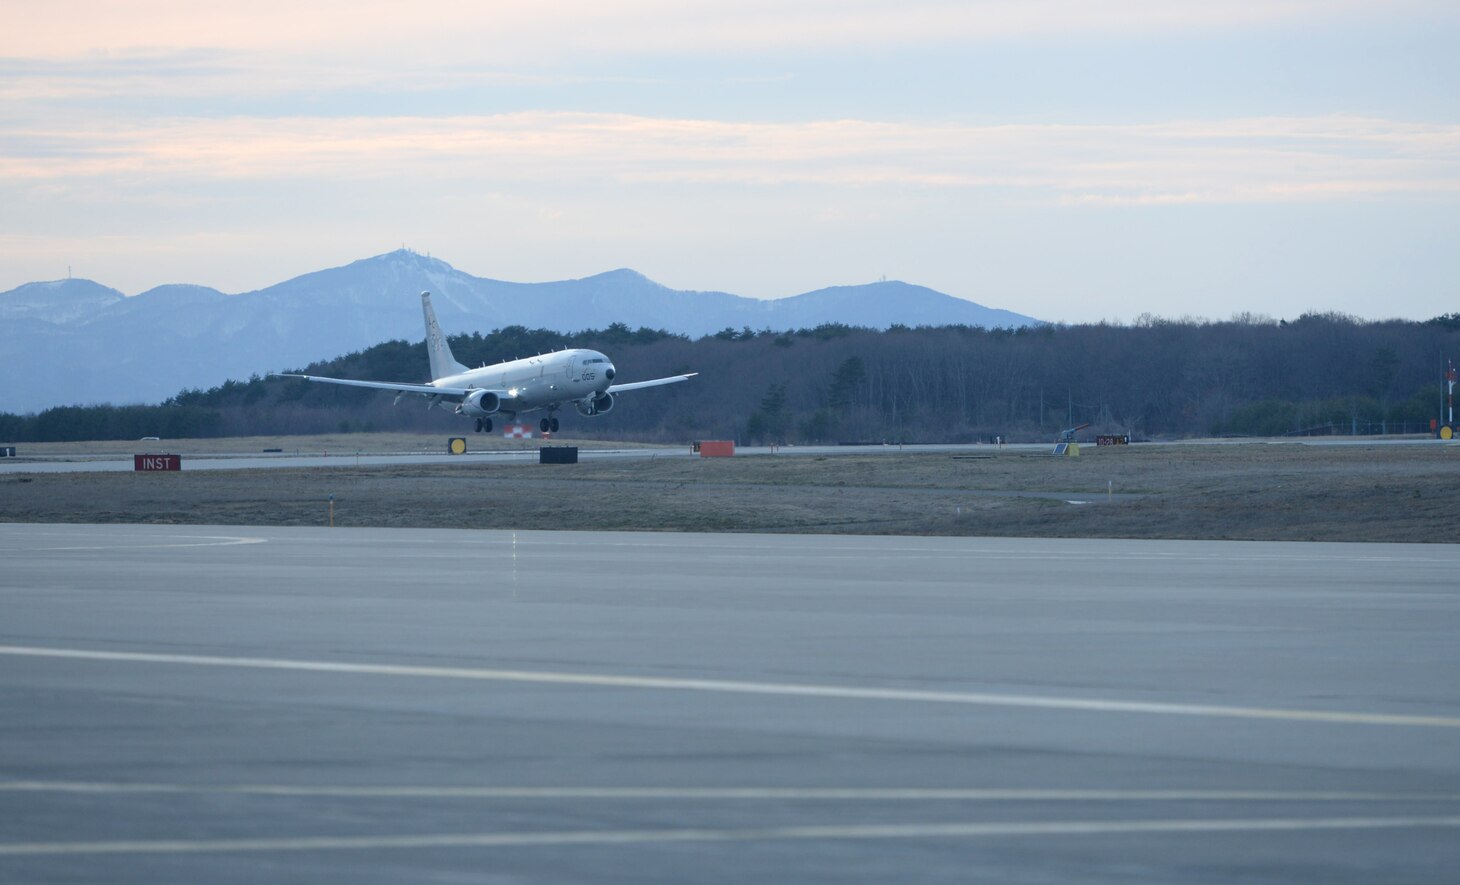 A P-8A Poseidon aircraft assigned to the “Fighting Tigers” of Patrol Squadron (VP) 8, lands on the flight line of Misawa Air Base after a Search and Rescue mission for a missing Japanese F-35 fighter jet Pilot. VP-8 is deployed to the U.S. 7th Fleet (C7F) area of operations conducting maritime patrol and reconnaissance operations in support of Commander, Task Force 72, C7F, and U.S. Pacific Command objectives throughout the Indo-Asia Pacific region.